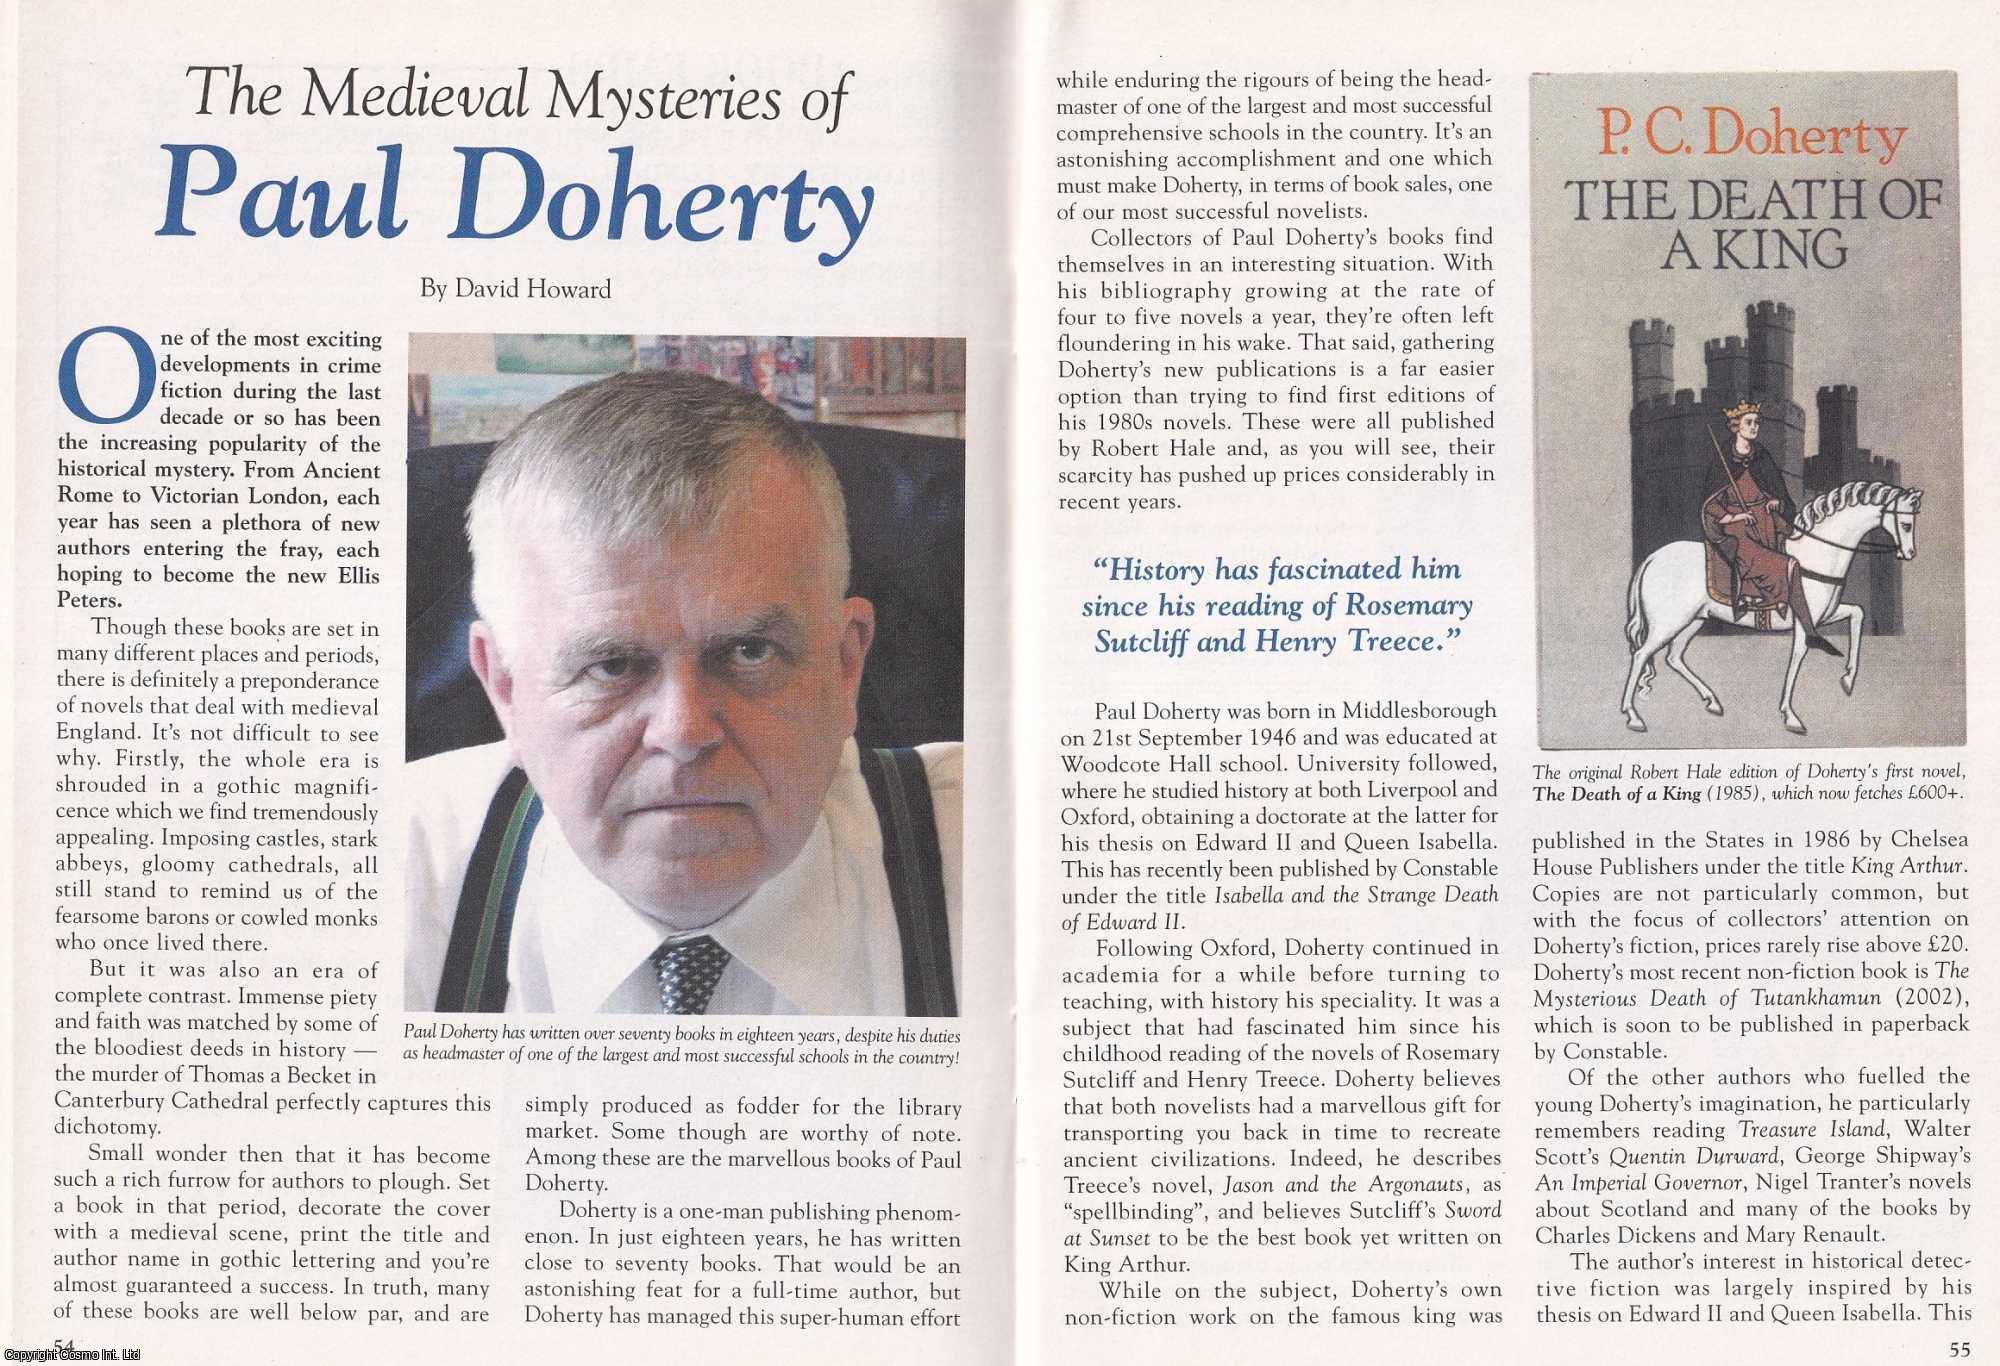 David Howard - The Medieval Mysteries of Paul Doherty. This is an original article separated from an issue of The Book & Magazine Collector publication, 2003.